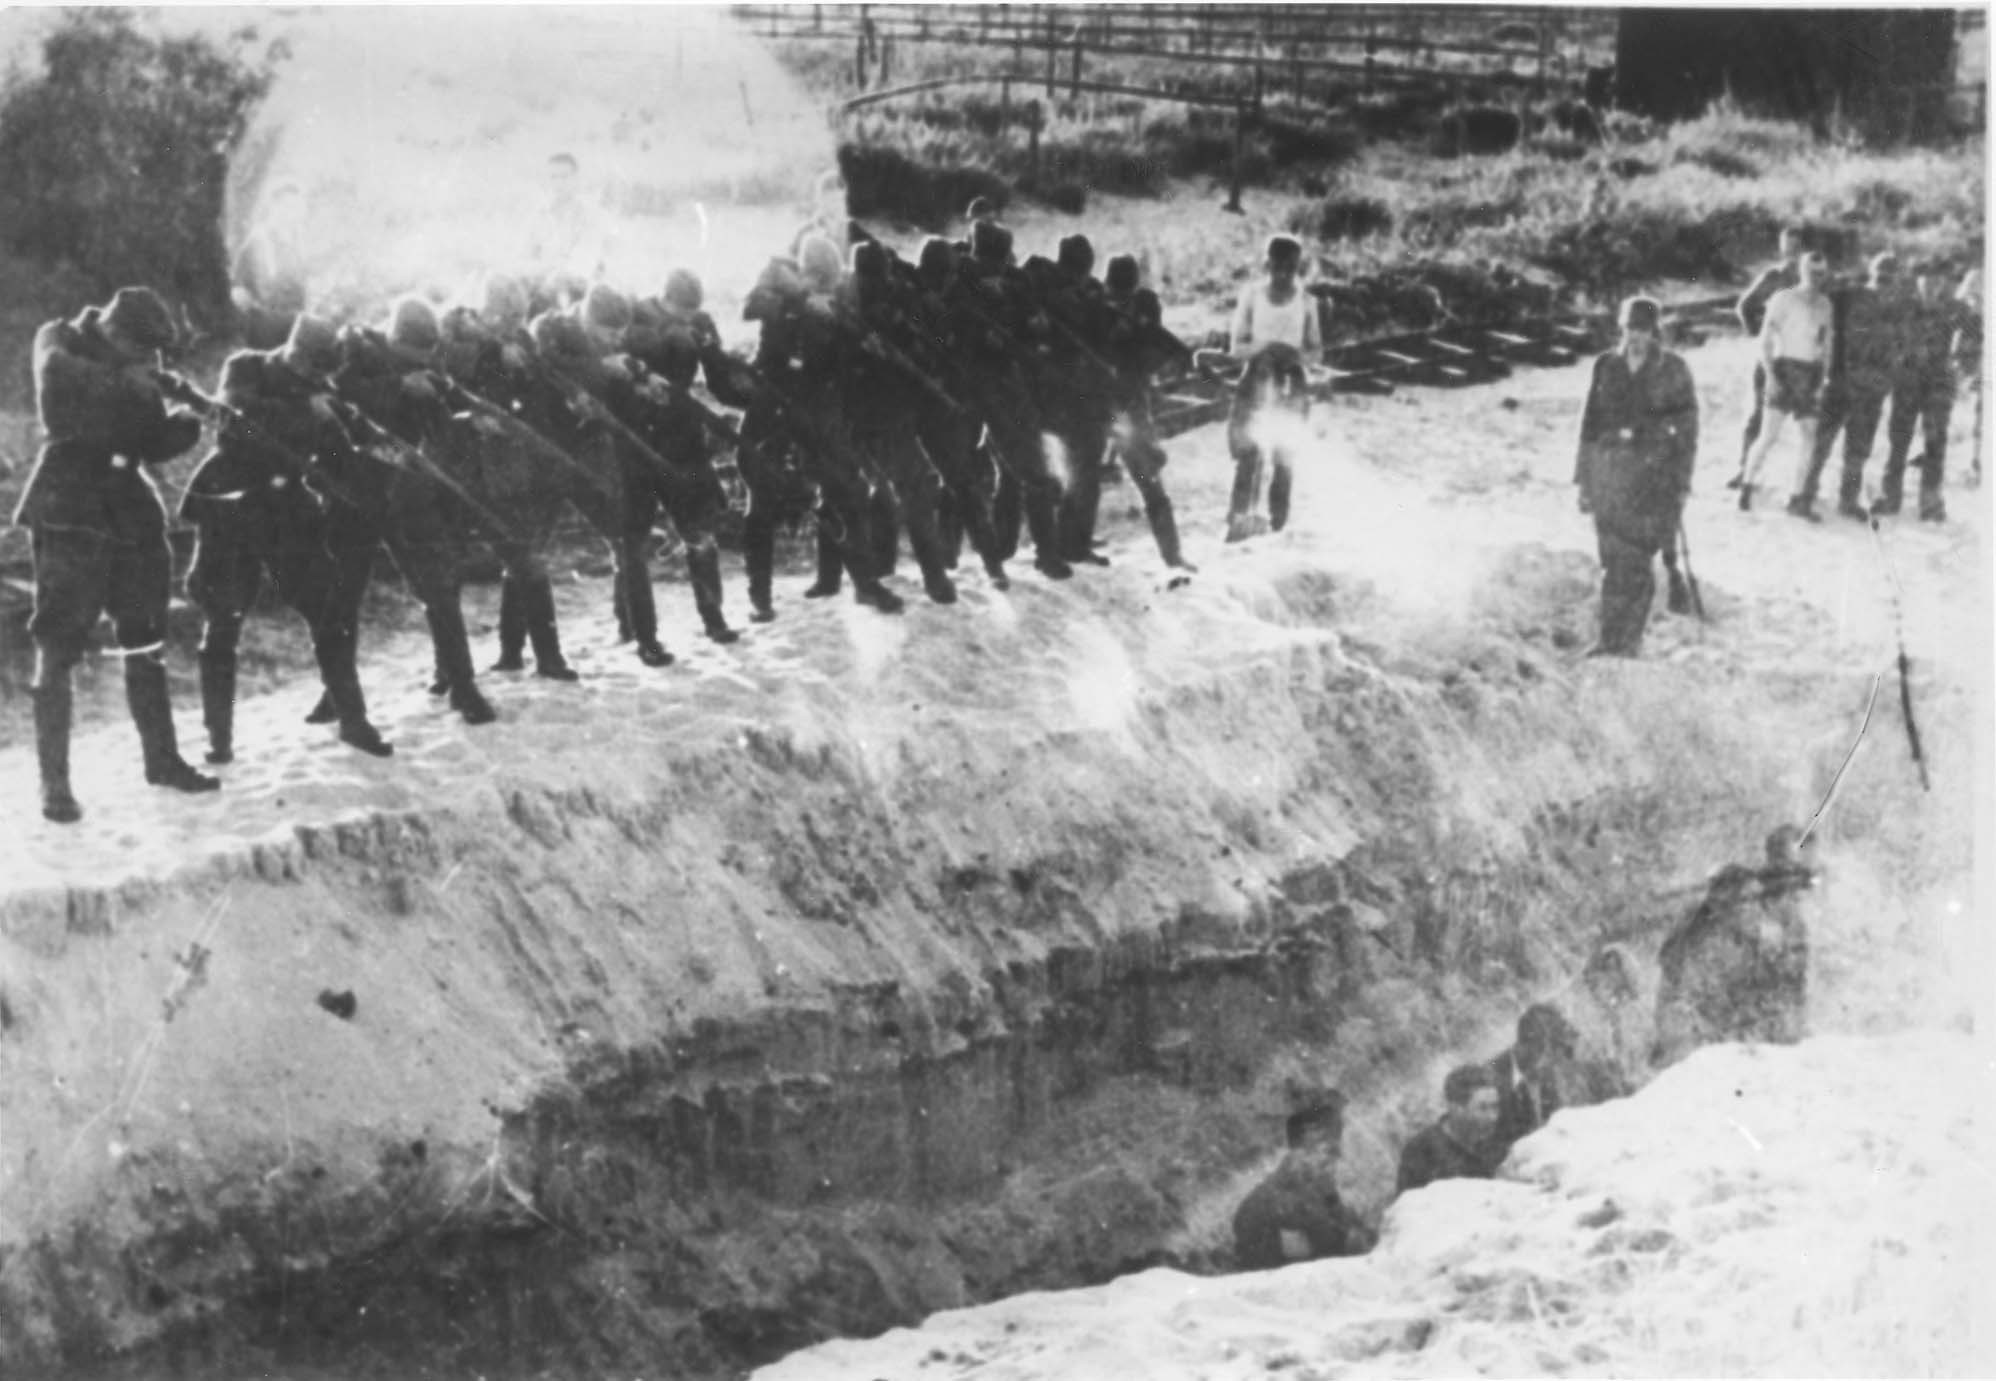 Einsatzgruppen soldiers shooting Jews who are in a ditch